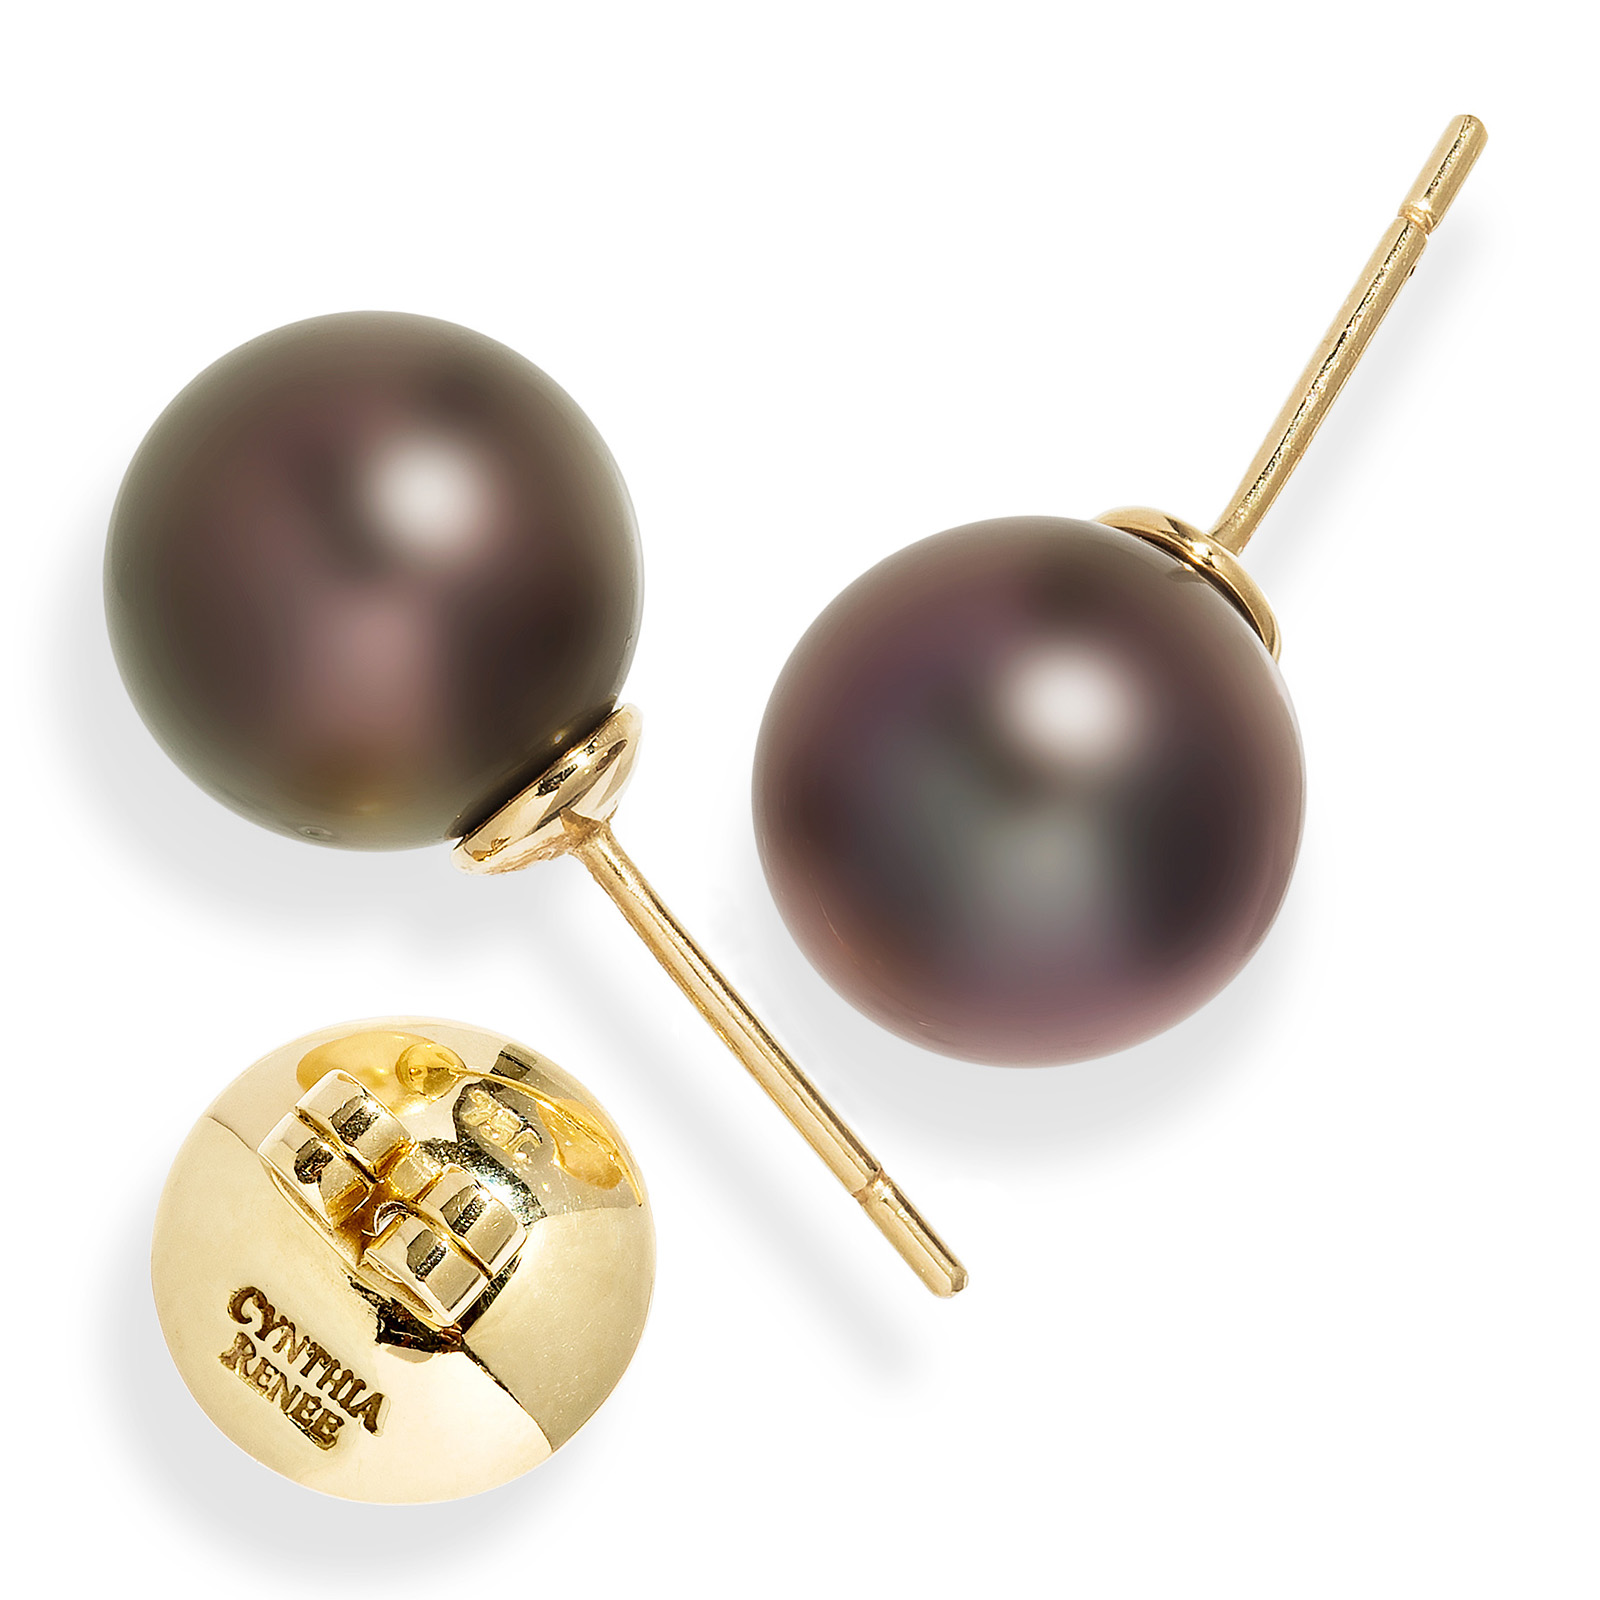 Pair of Black Tahitian Pearls, 11.2mm, on 18-karat yellow gold removable 